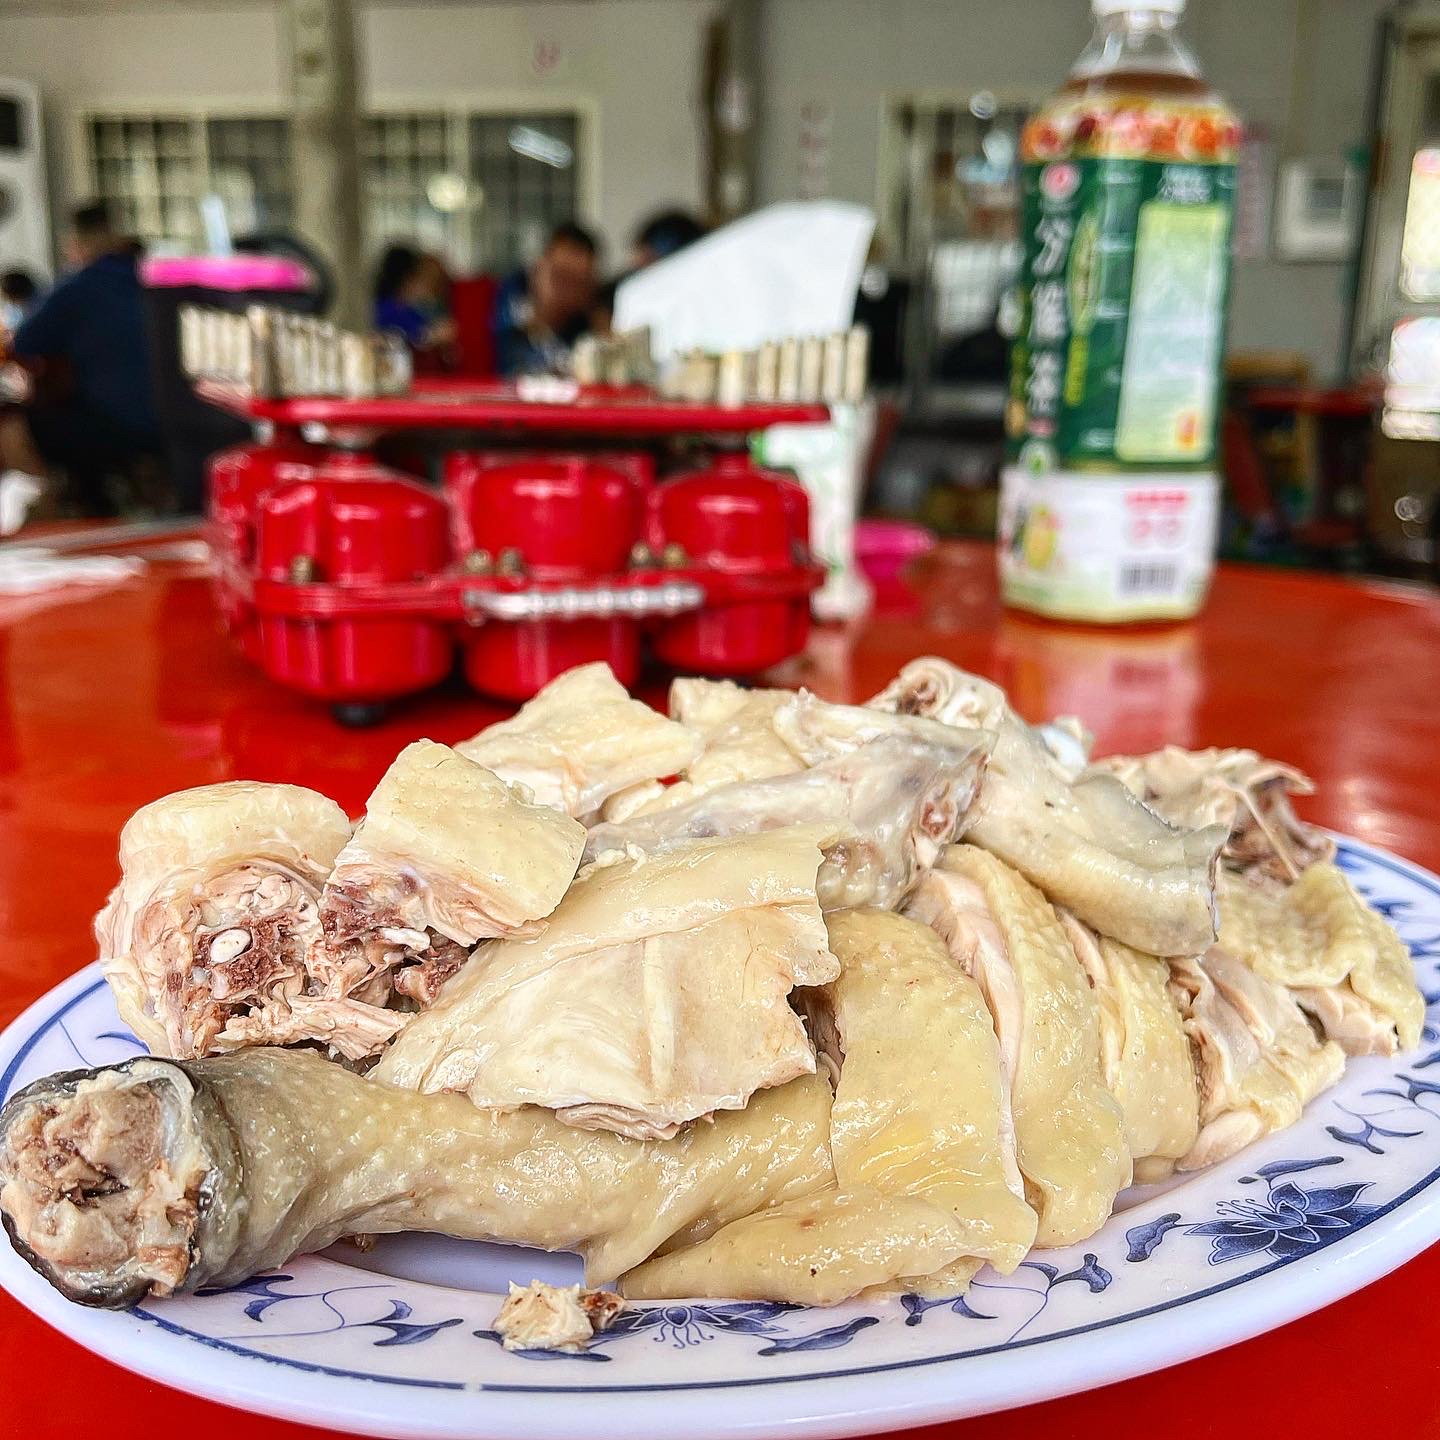 “The Tainan” may not catch your eye at first glance, but come the weekend, you’ll find a long queue for Tainan’s culinary gem, the “Dew Chicken”.